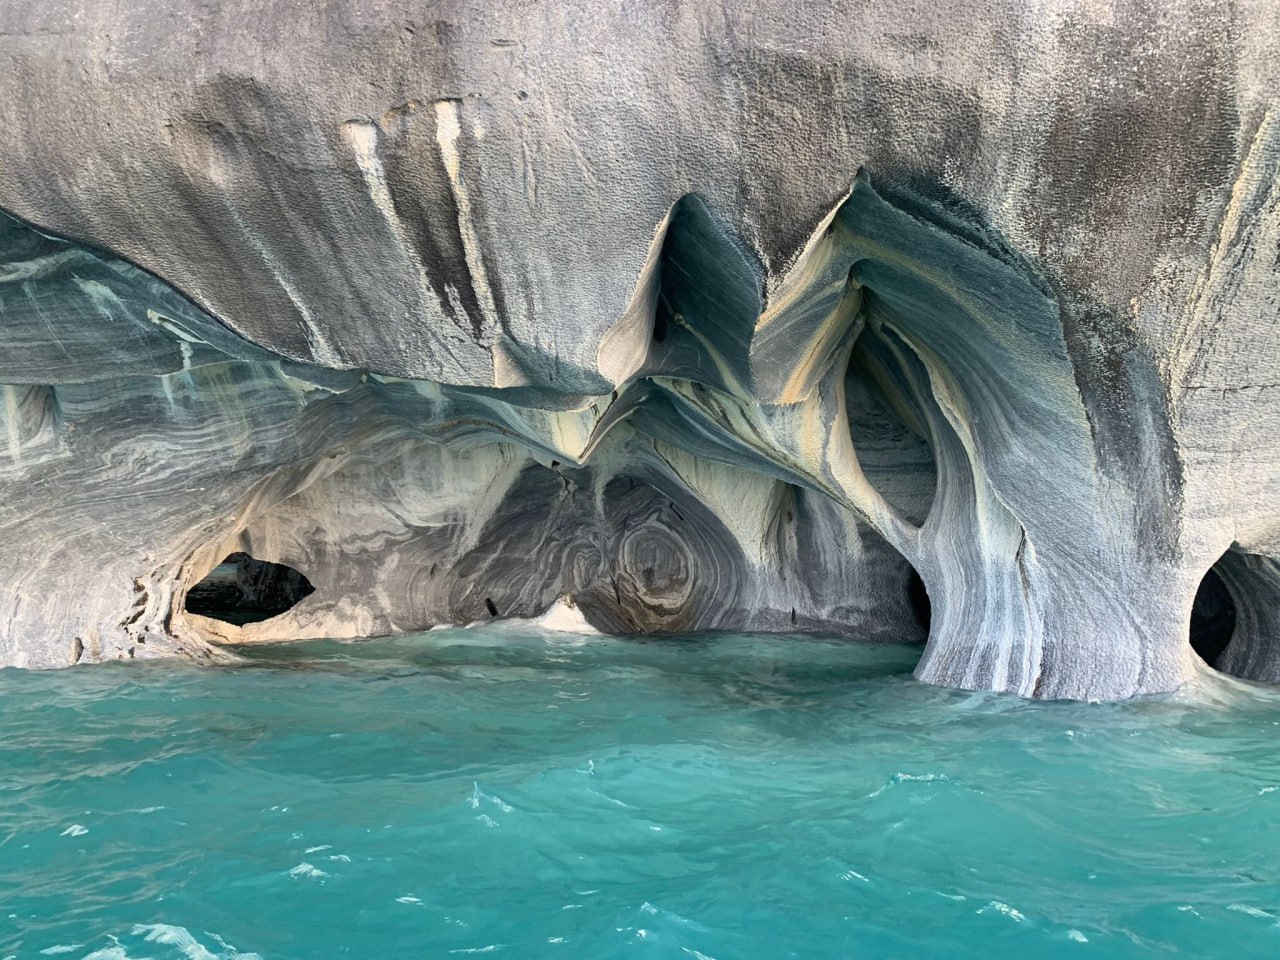 The marble caves of Lago General Carrera in the Aysen Region